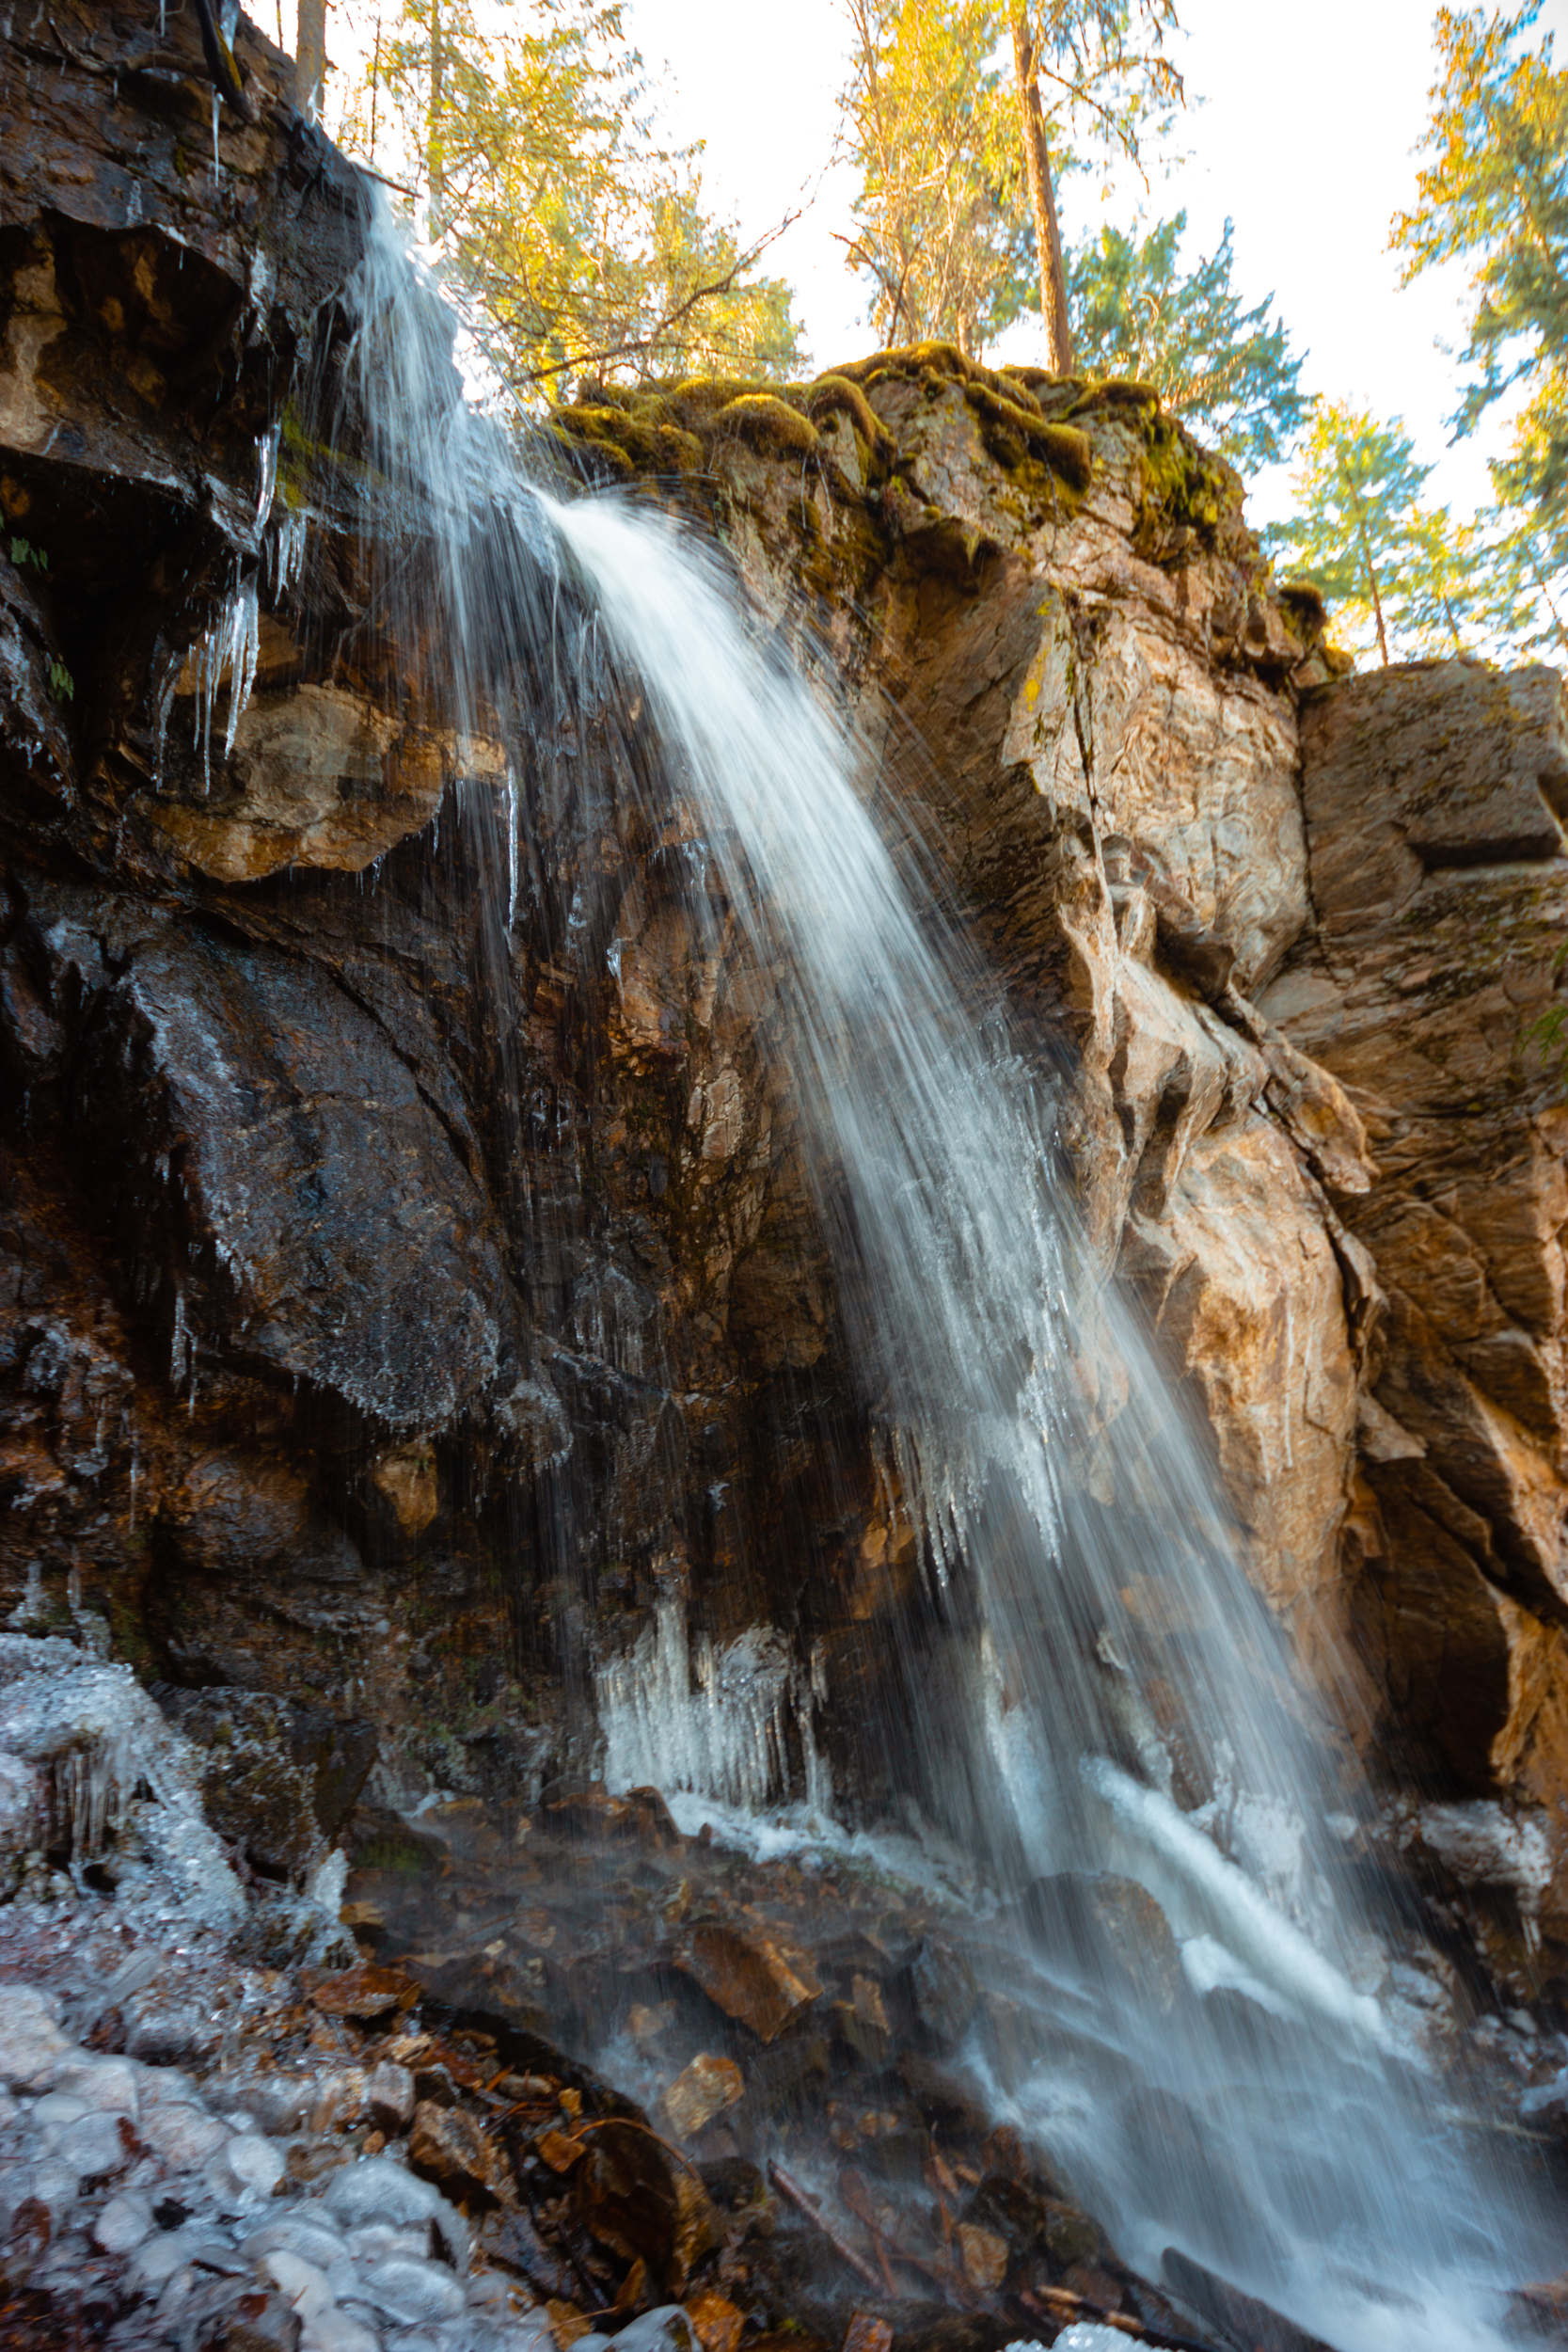 Cosens Falls, a small waterfall in Vernon, tumbles down a rock face.